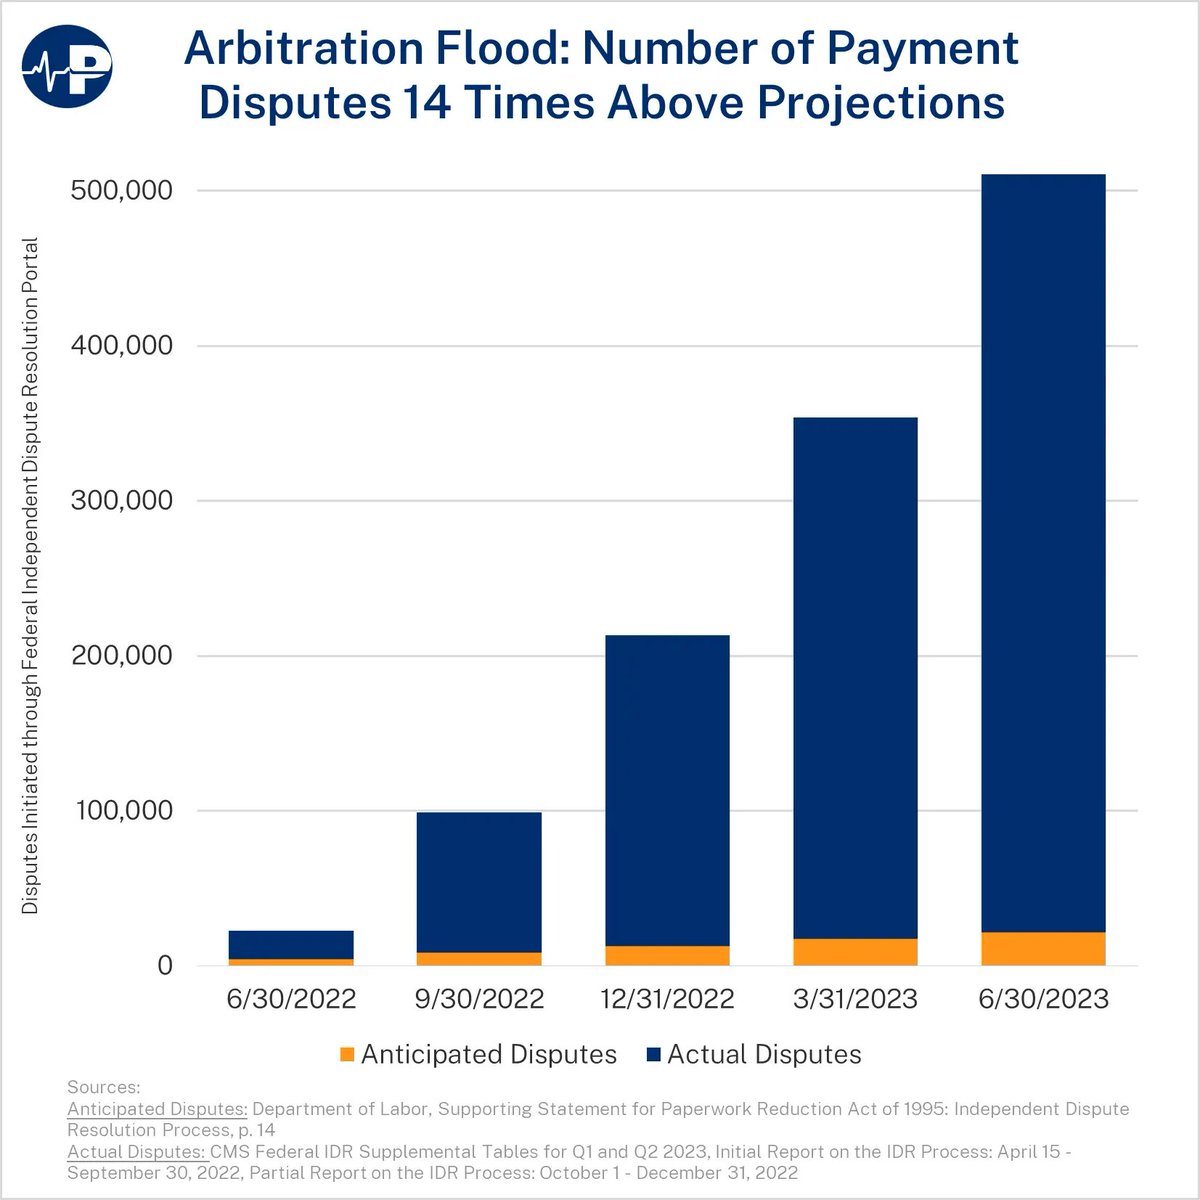 NEW 📊: In the first year, the #NoSurprisesAct's arbitration system had 14x more disputes than expected. 

The median IDR decision was 50% higher than in-network commercial prices and 4x higher than Medicare; the NSA's impact on health spending is concerning.

#ParagonPIC